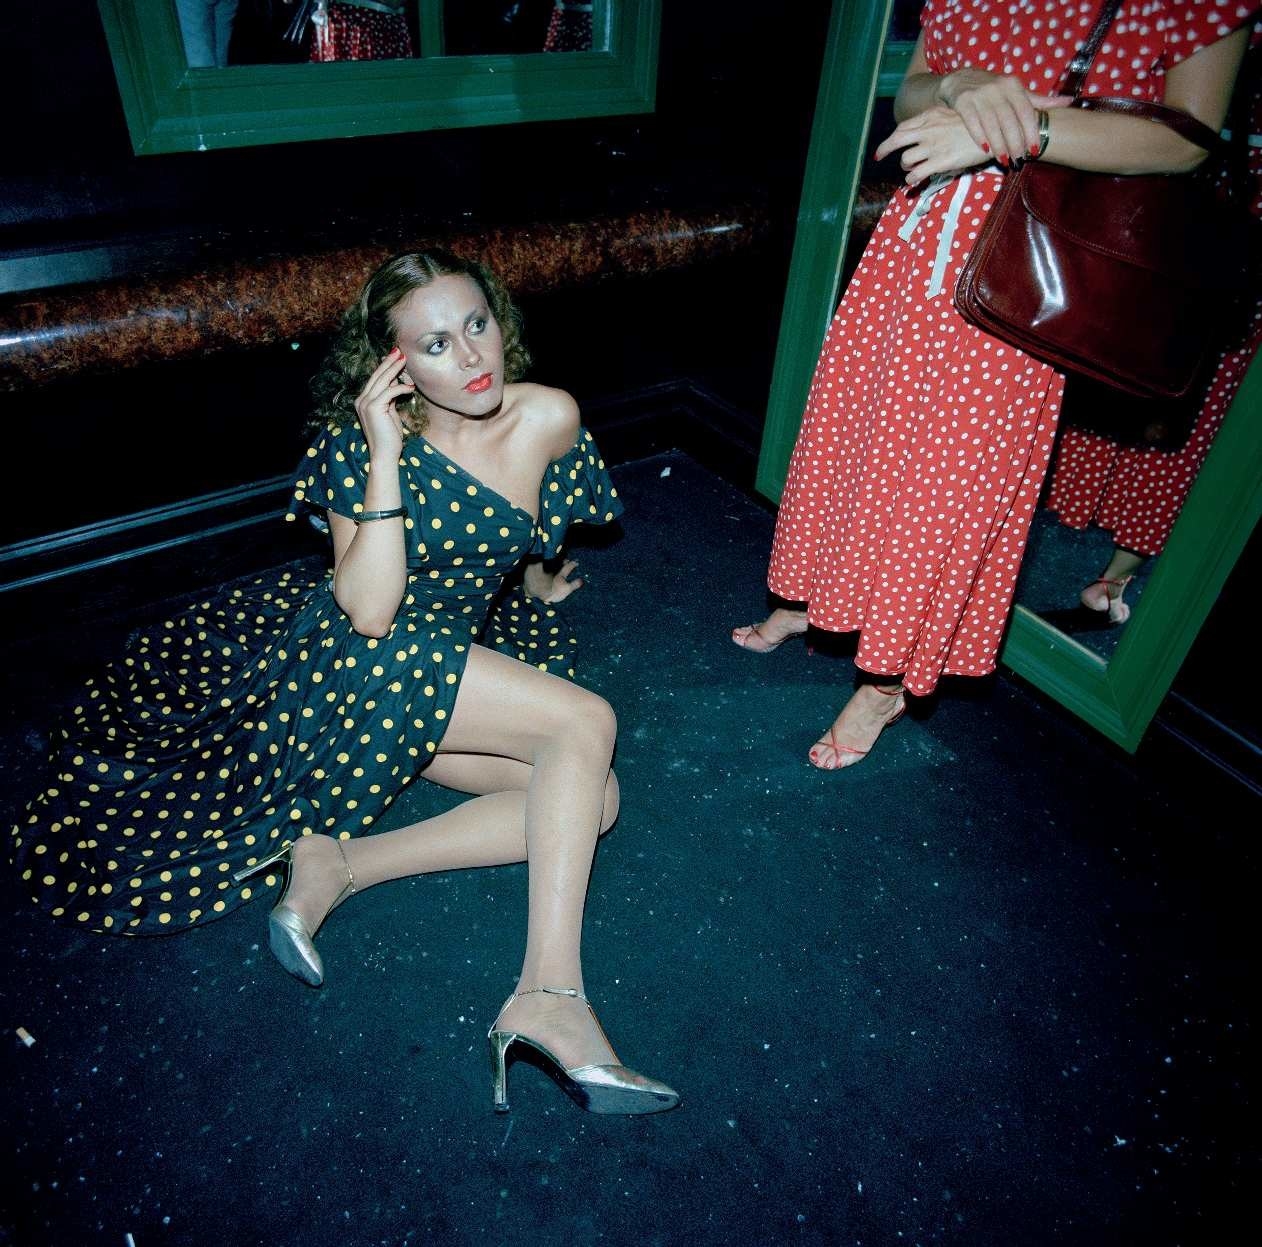 A woman in a dress sitting on the ground while another woman stands next to her